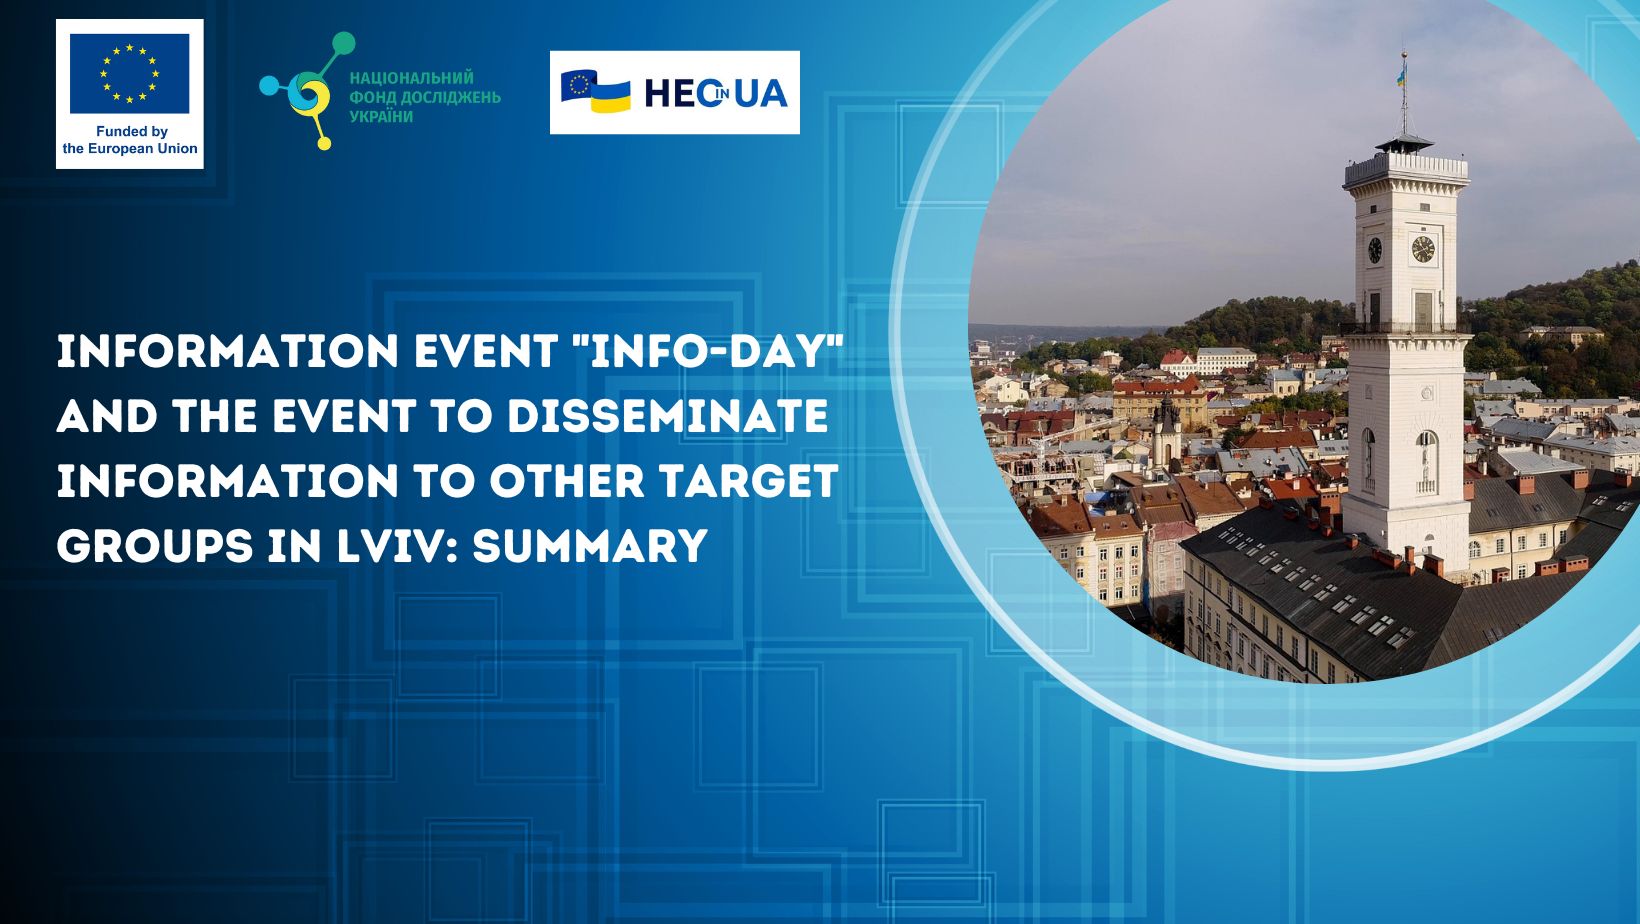 Information event “Info-Day” and the Event to disseminate information to other target groups in Lviv: summary